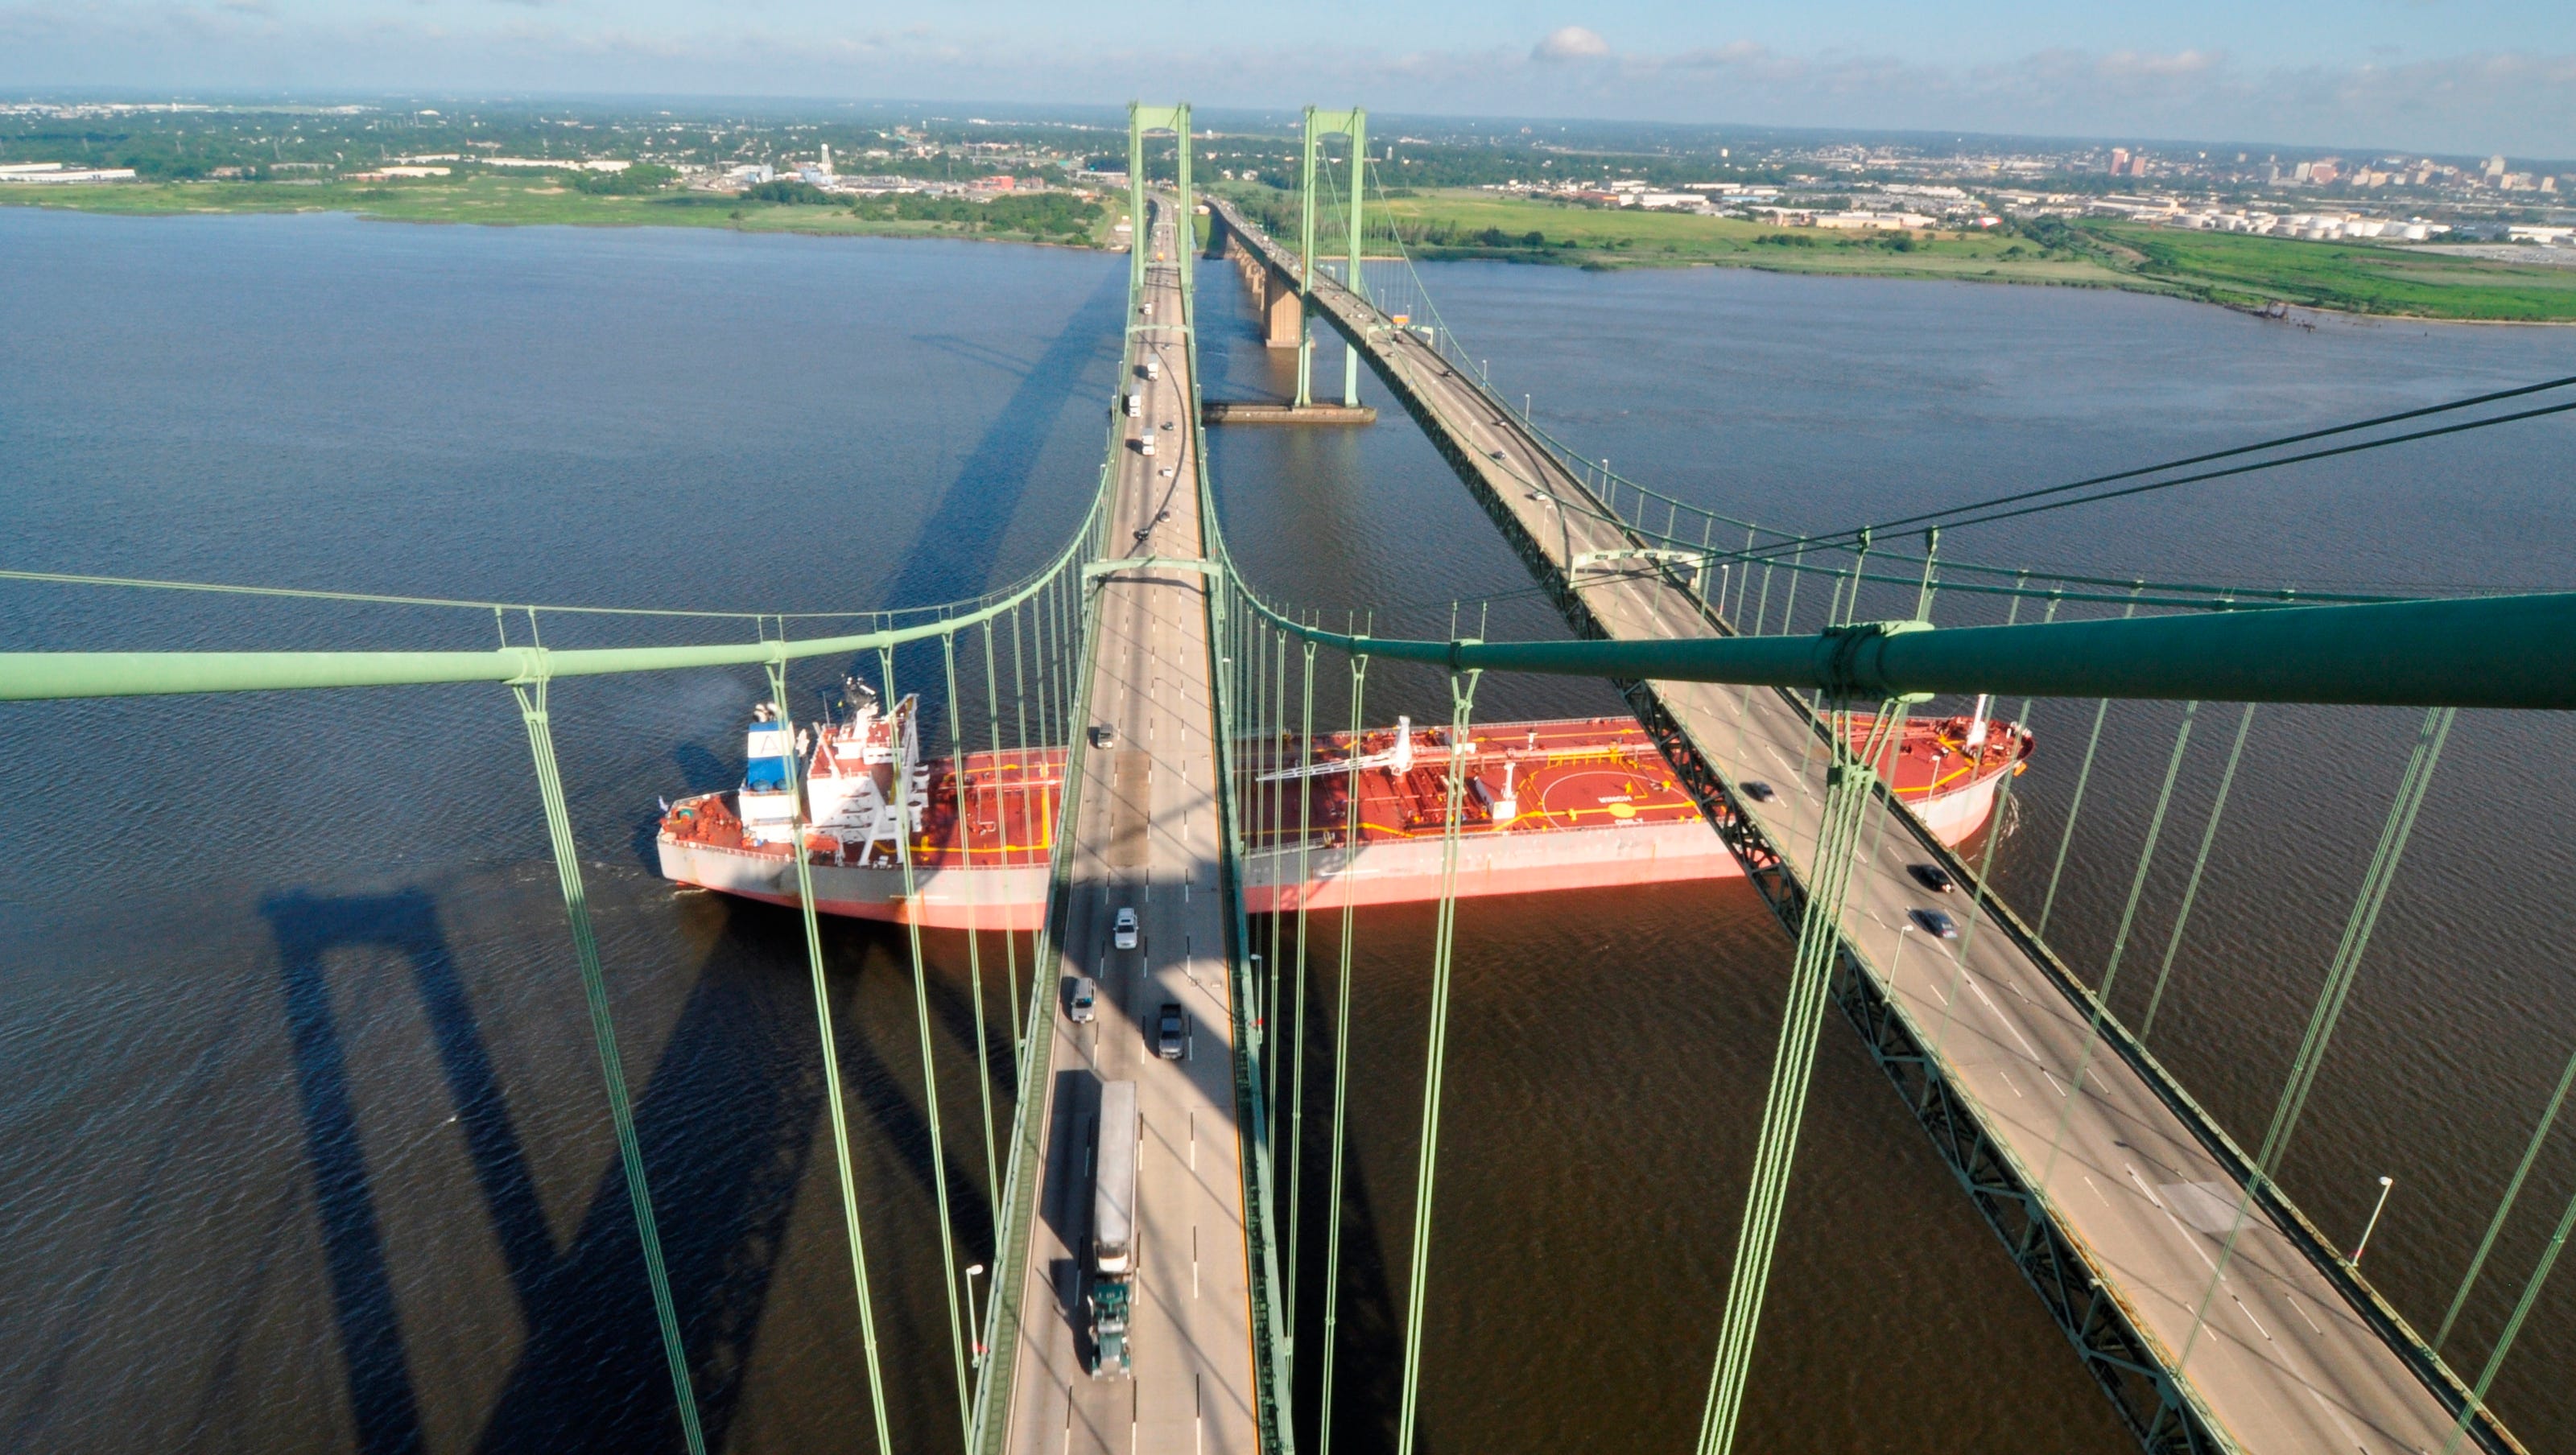 Project will protect Delaware Memorial Bridge from rusting